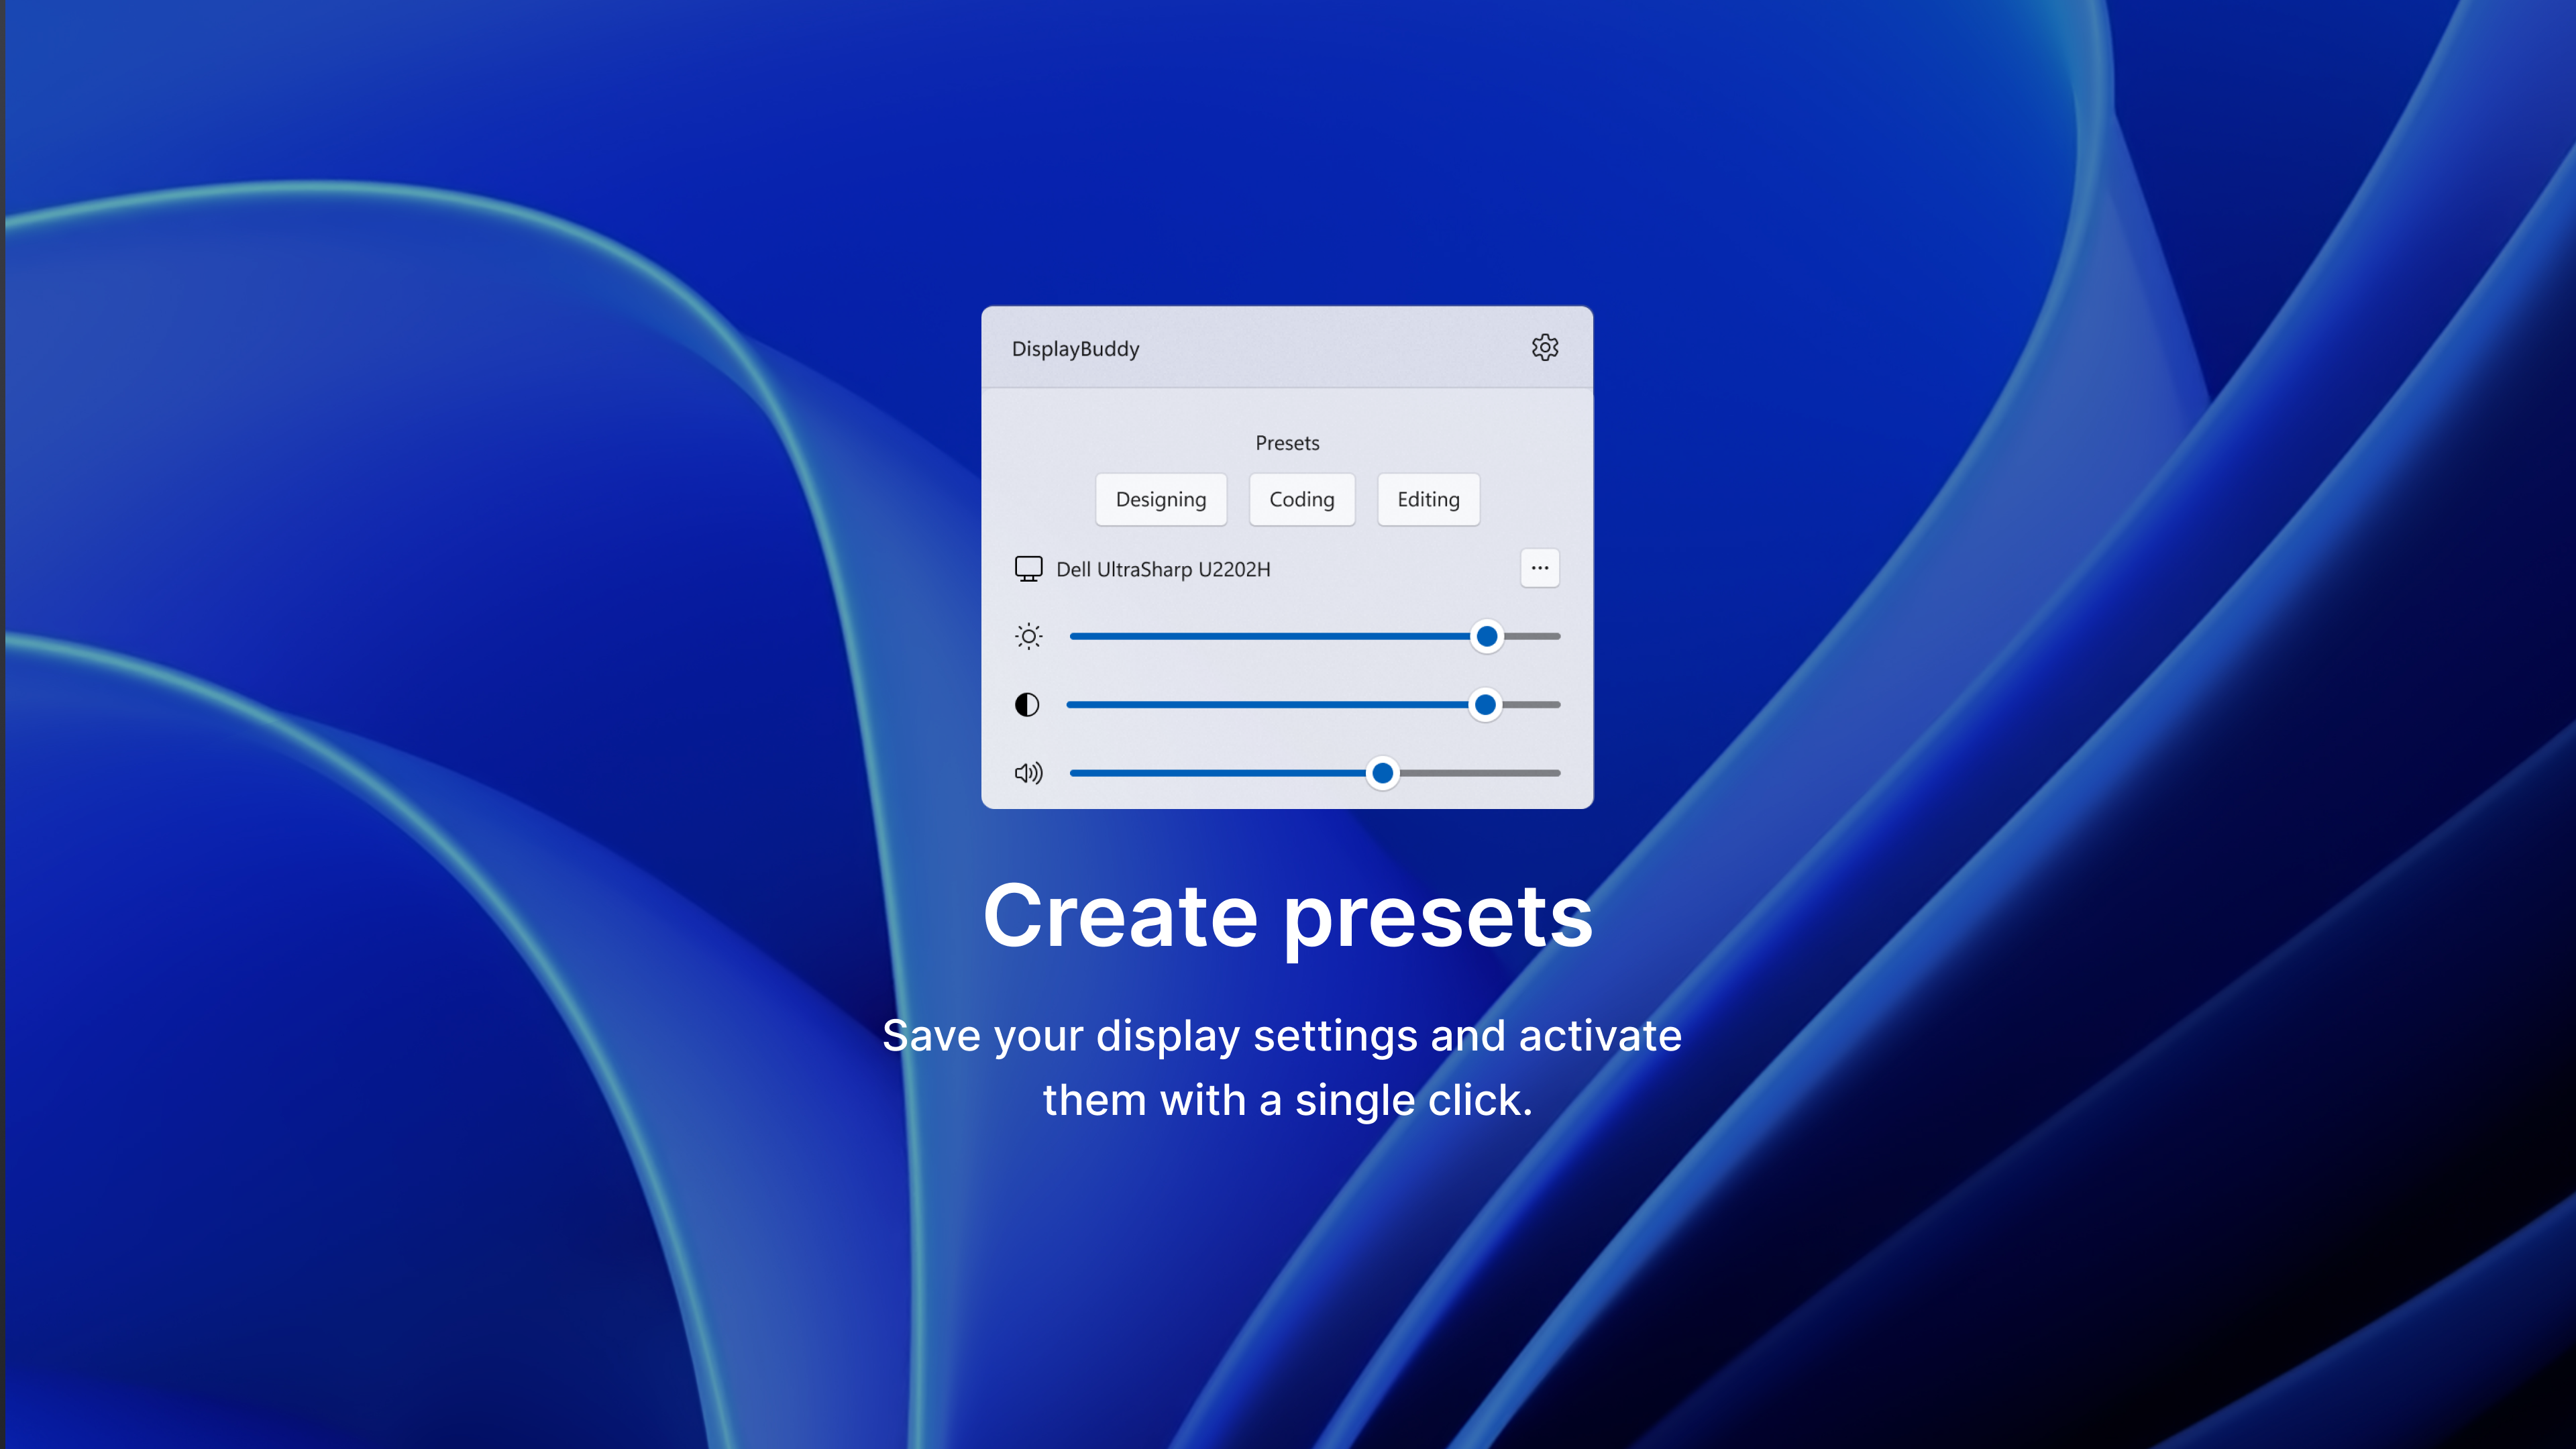 Create presets to quickly save and restore settings across monitors.